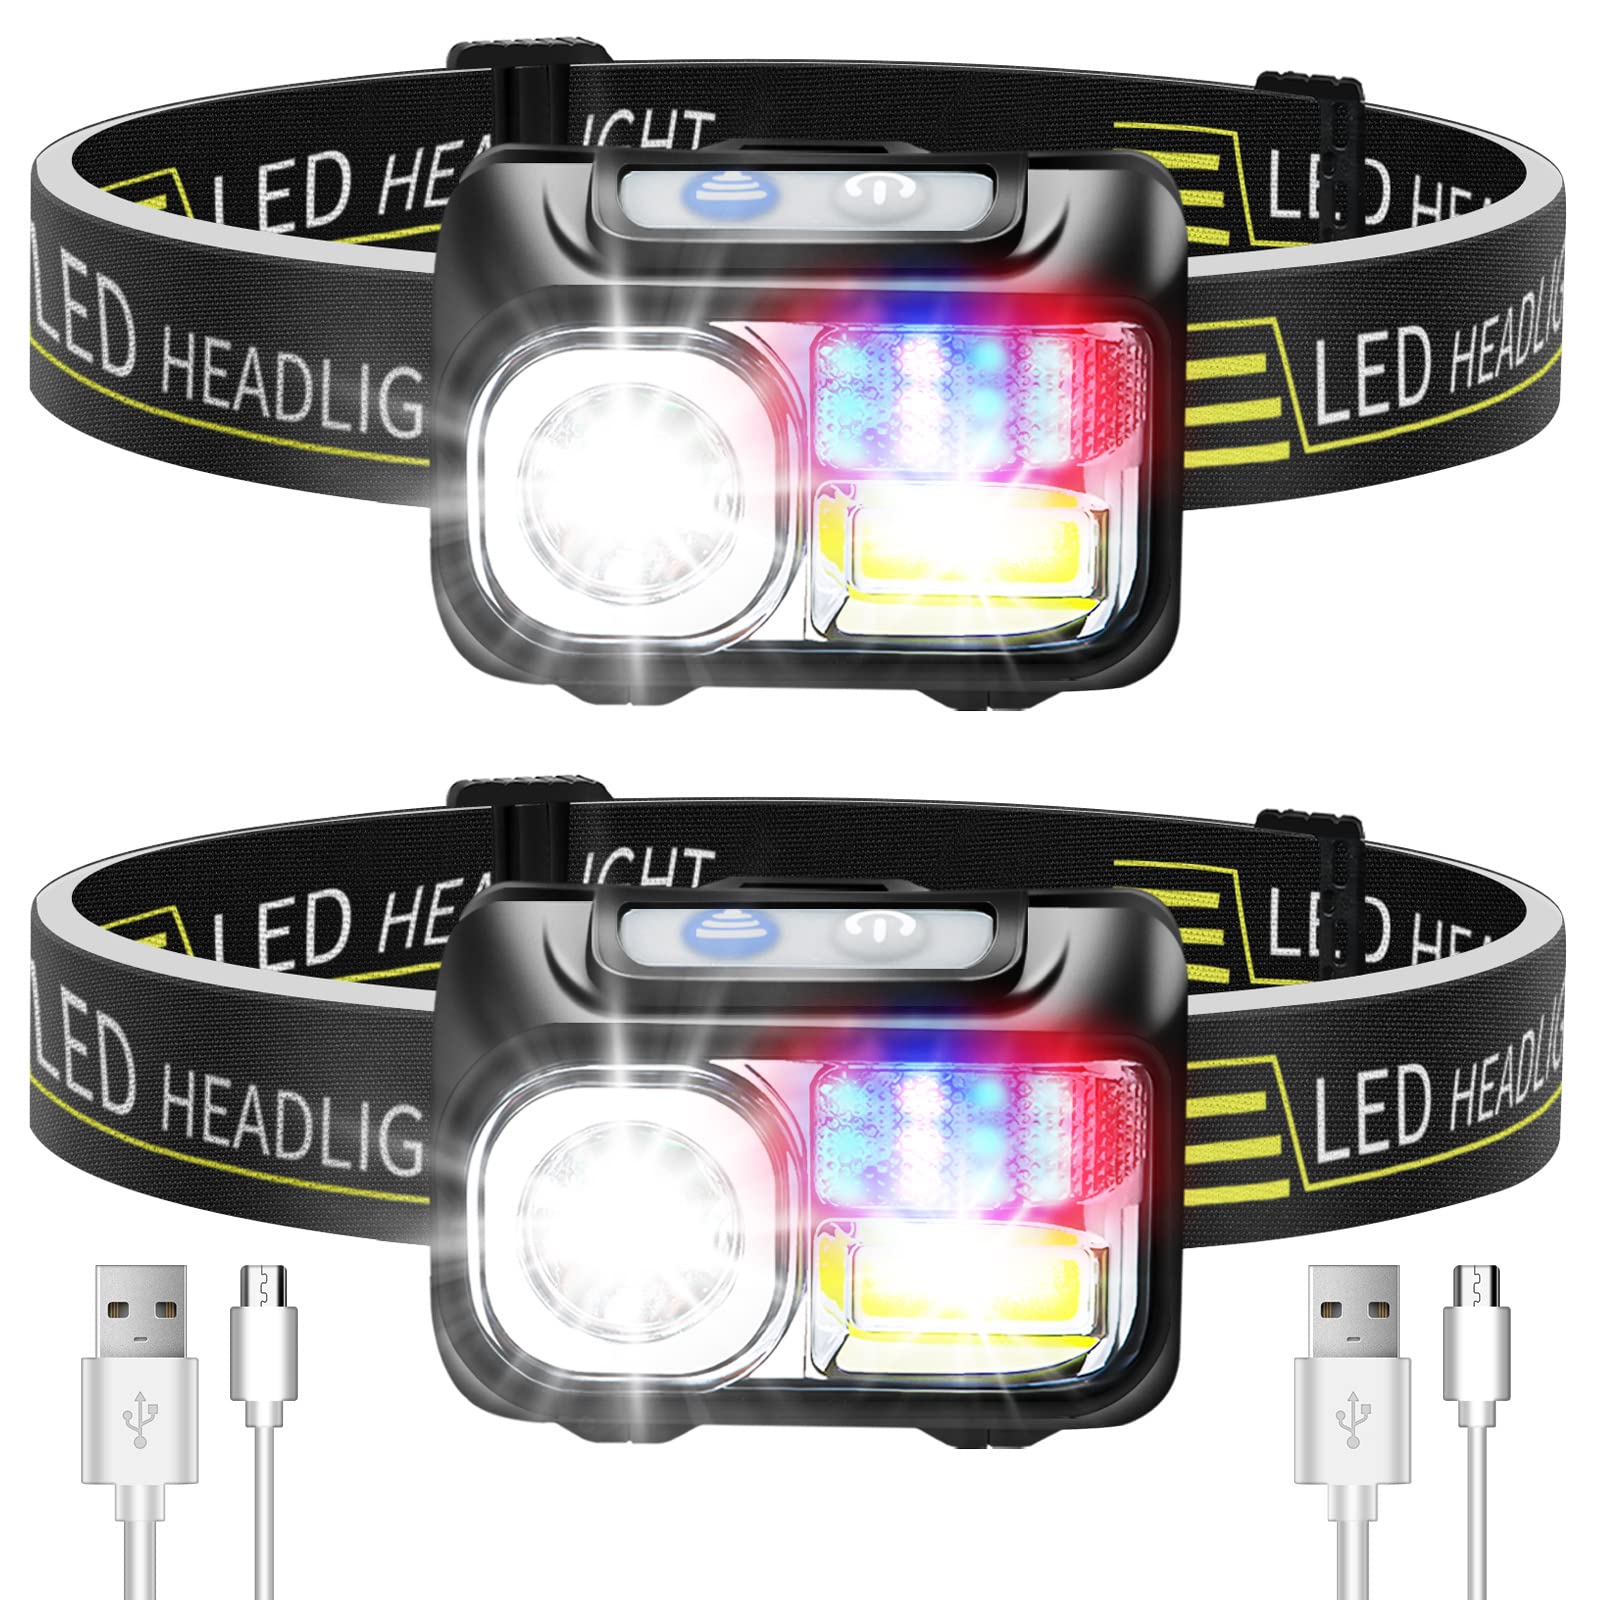 LED Head Torch Rechargeable, [2 Pack] Deerfun Headlamp Super Bright Headlight Waterproof 9 Light Modes with Red and Blue Warning Lights Sensor Switch Lightweight Headlight for Camping, Running